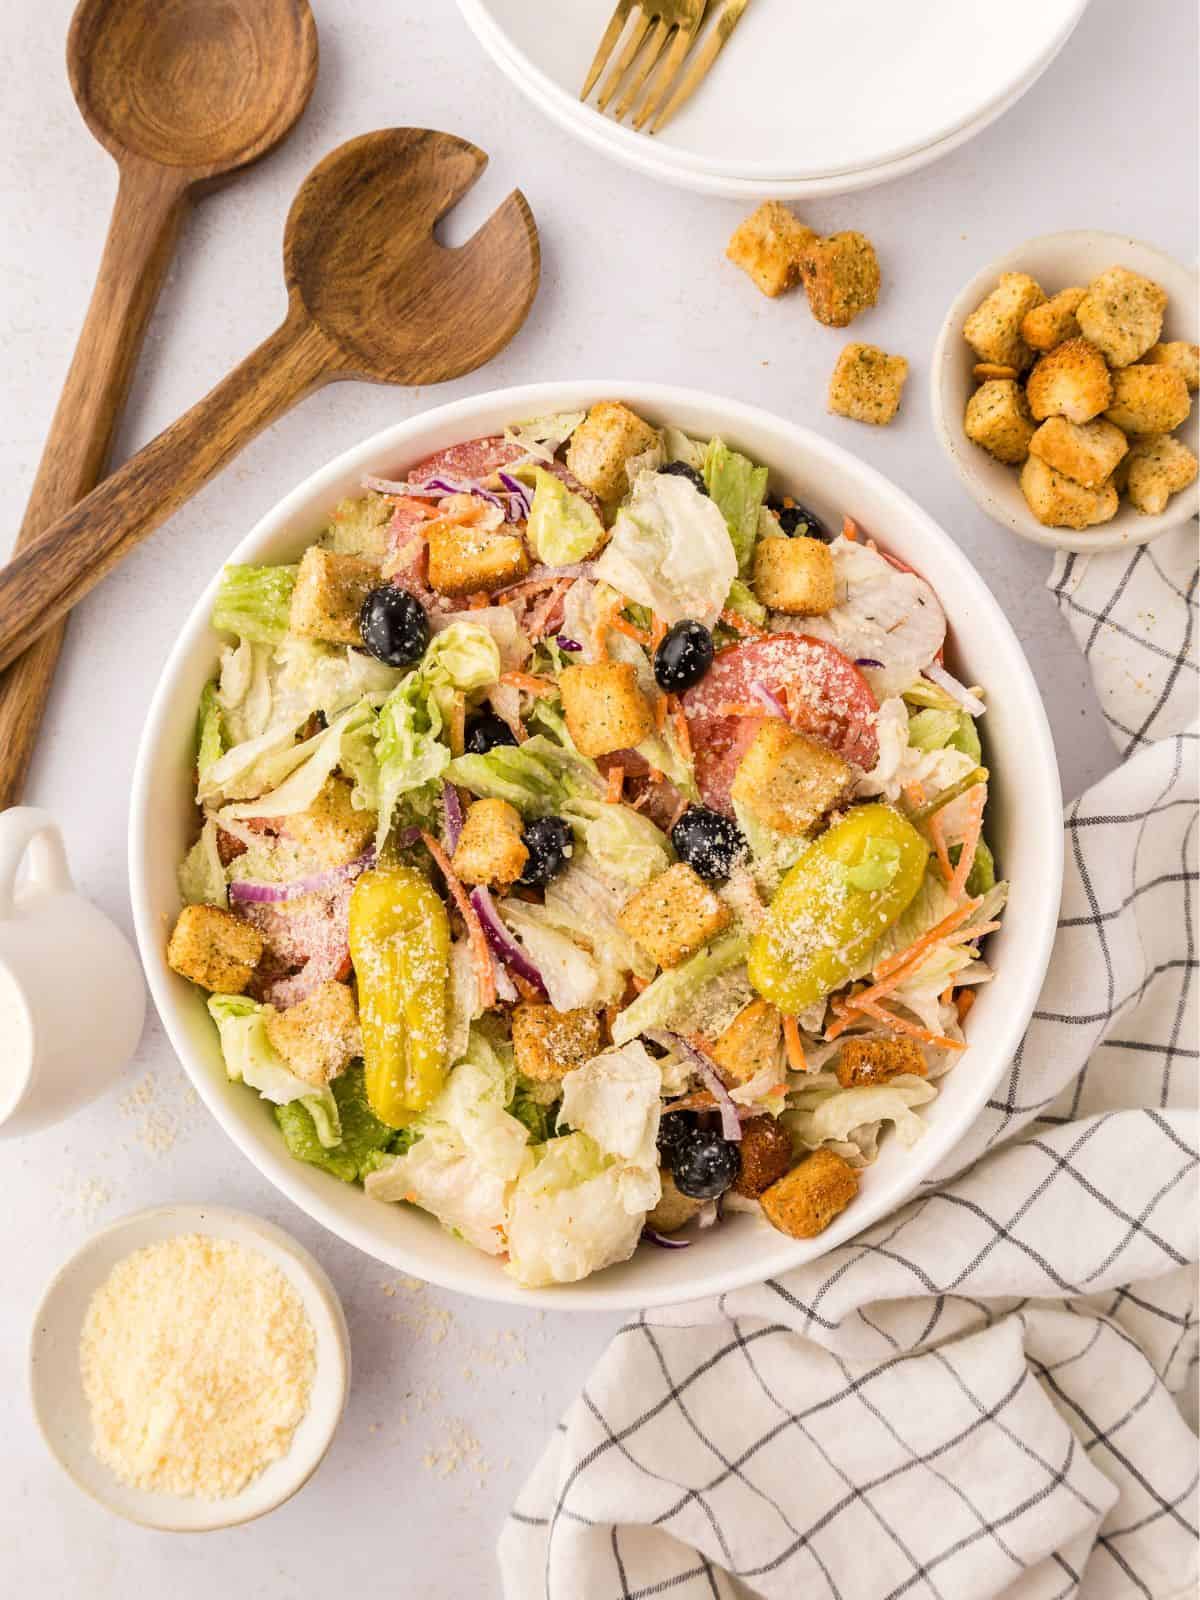 Copycat Olive Garden salad made with iceberg lettuce mix, olives, tomatoes, and croutons in large white serving bowl next to small bowl of parmesan cheese.